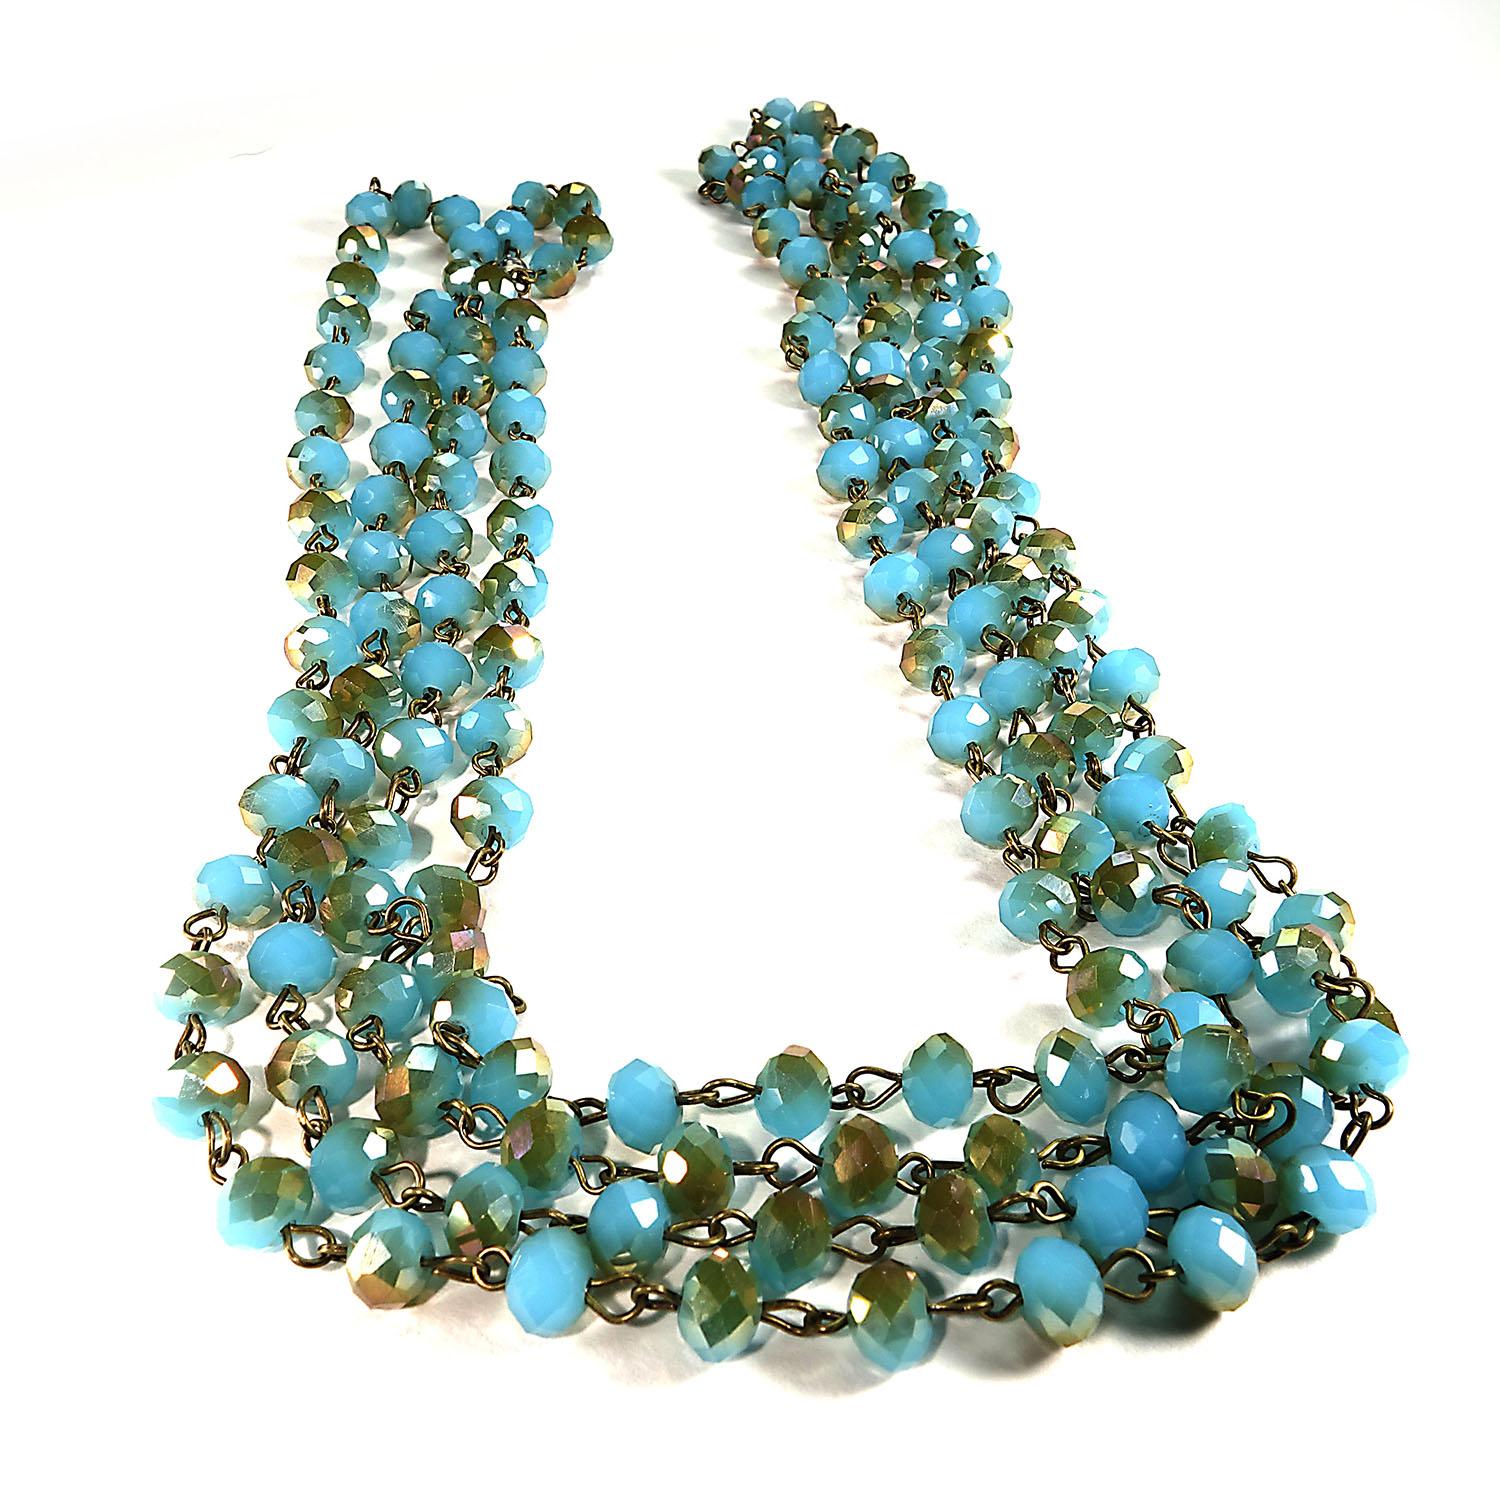 AJD Teal / Bronzy Crystal Bead Necklace  Great Gift! For Sale 1